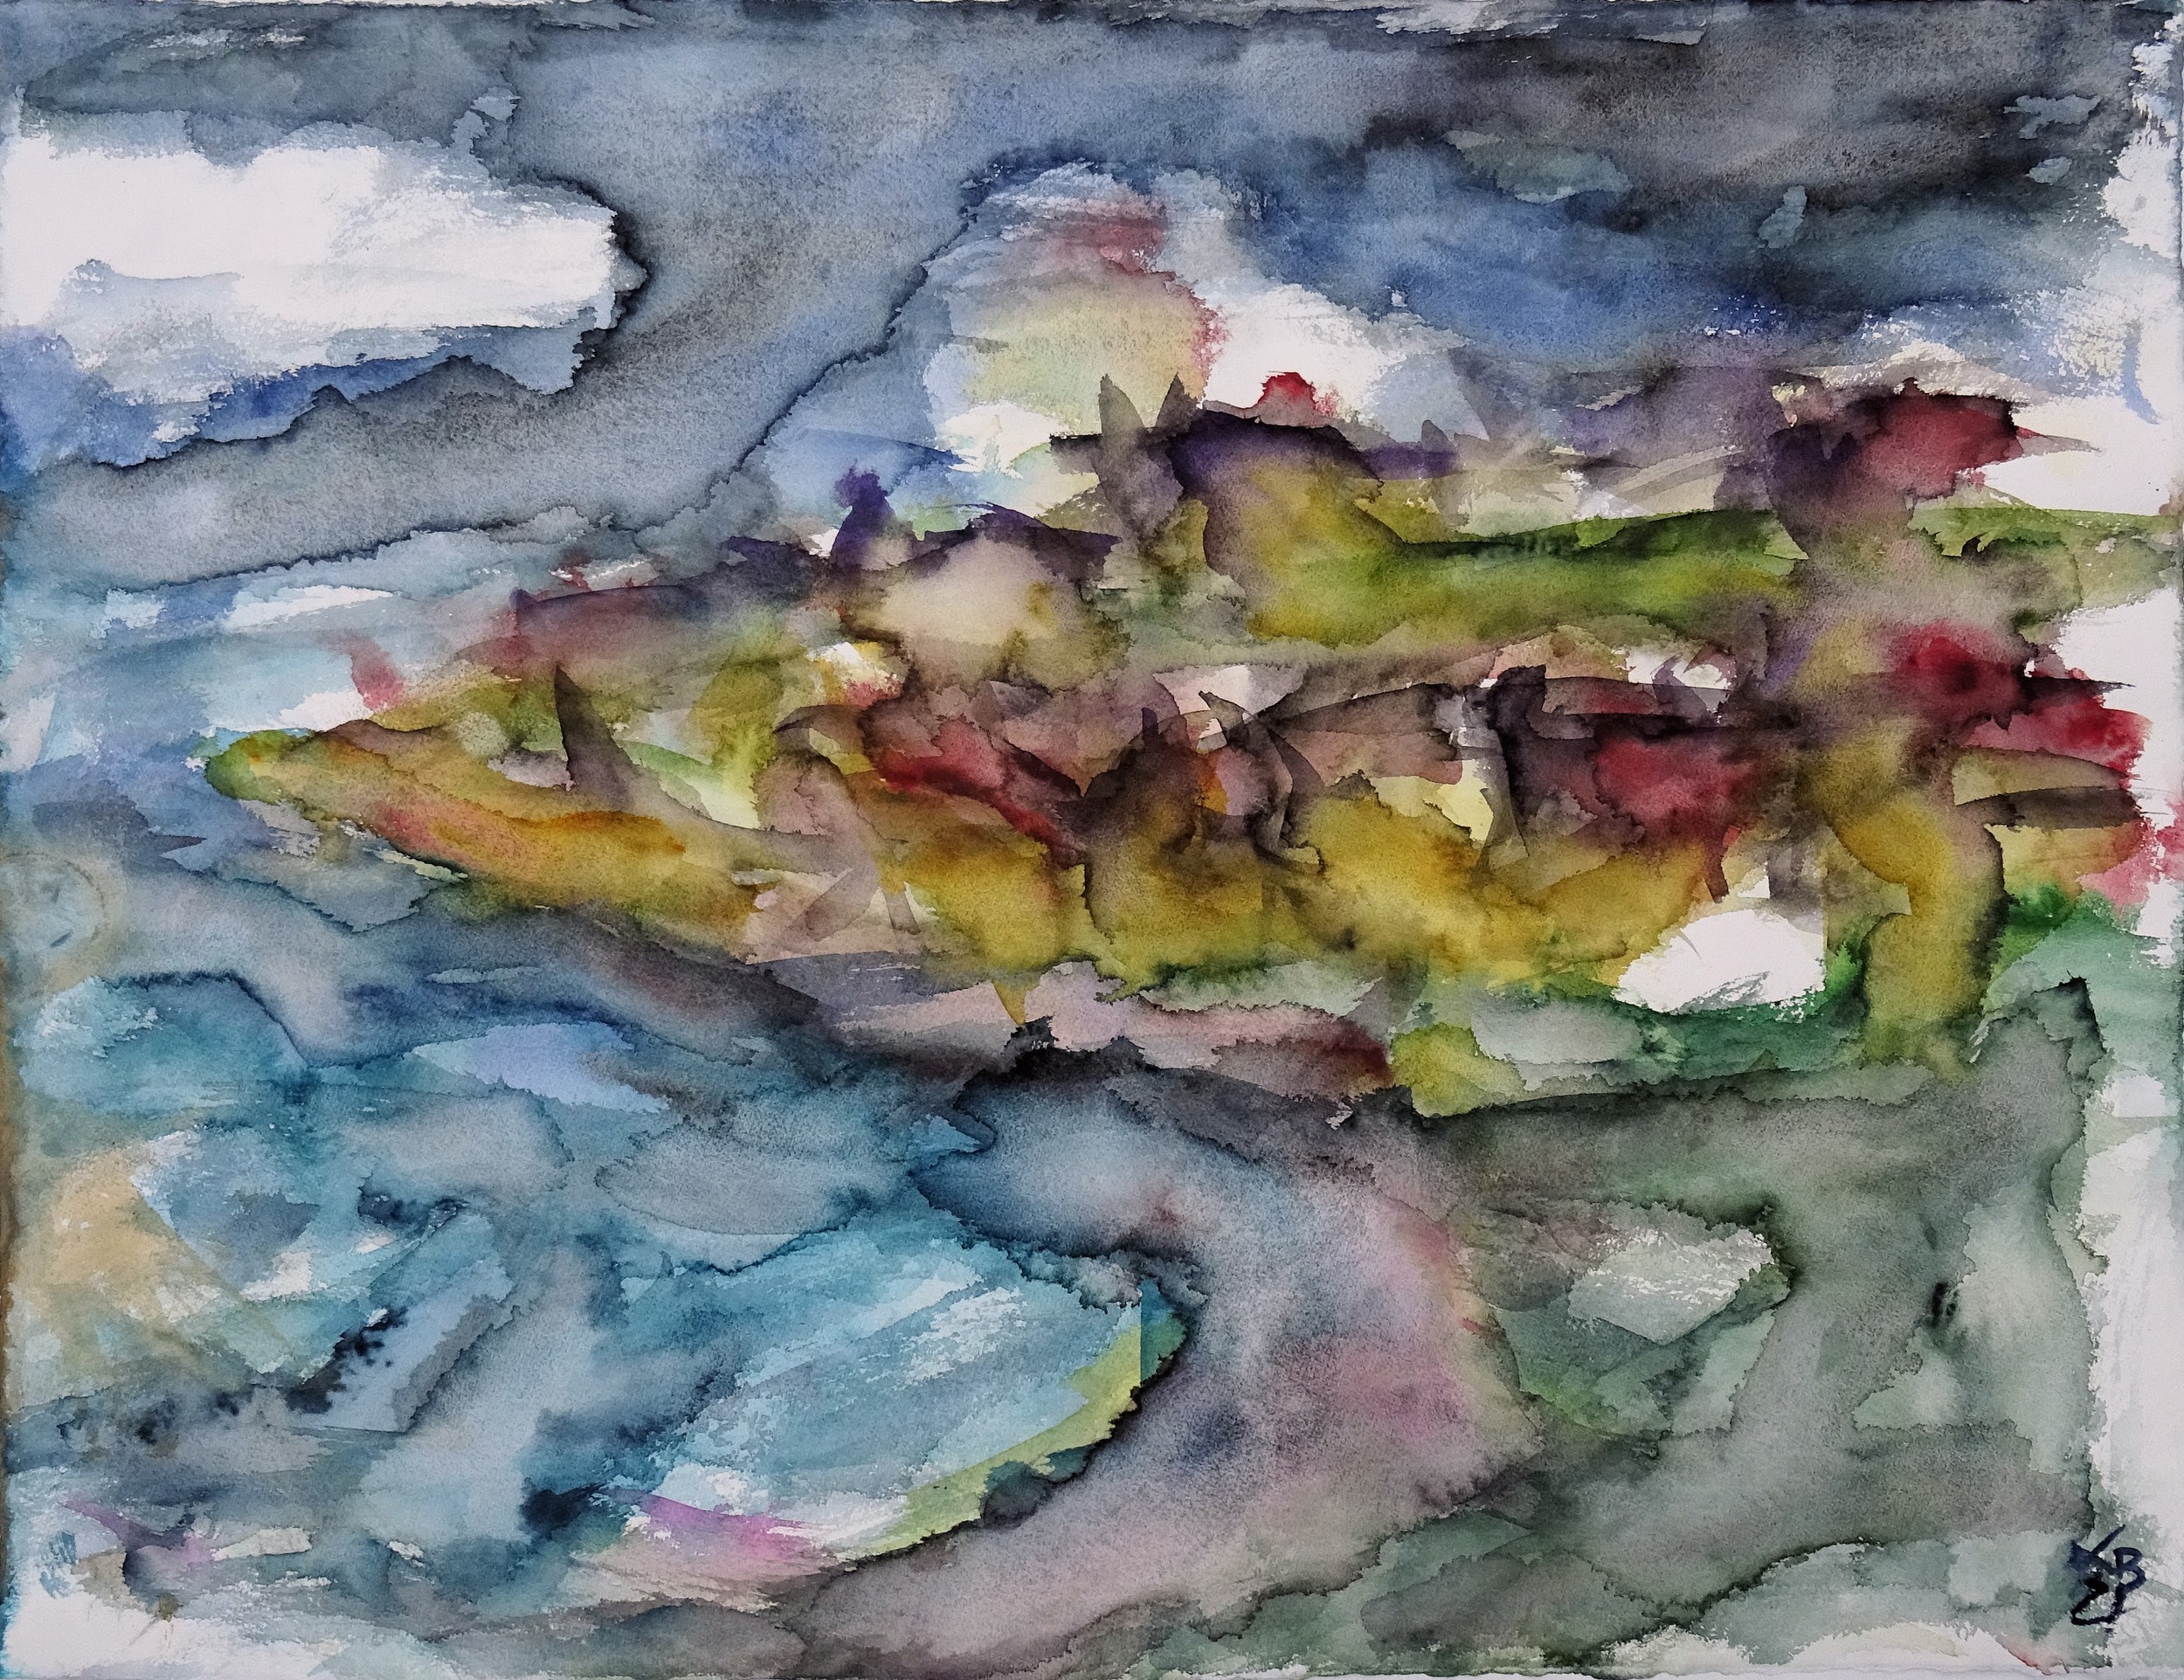 Longing for Islay - Portnahaven, Watercolour 65 x 50 cm, © 2021 by Klaus Bölling